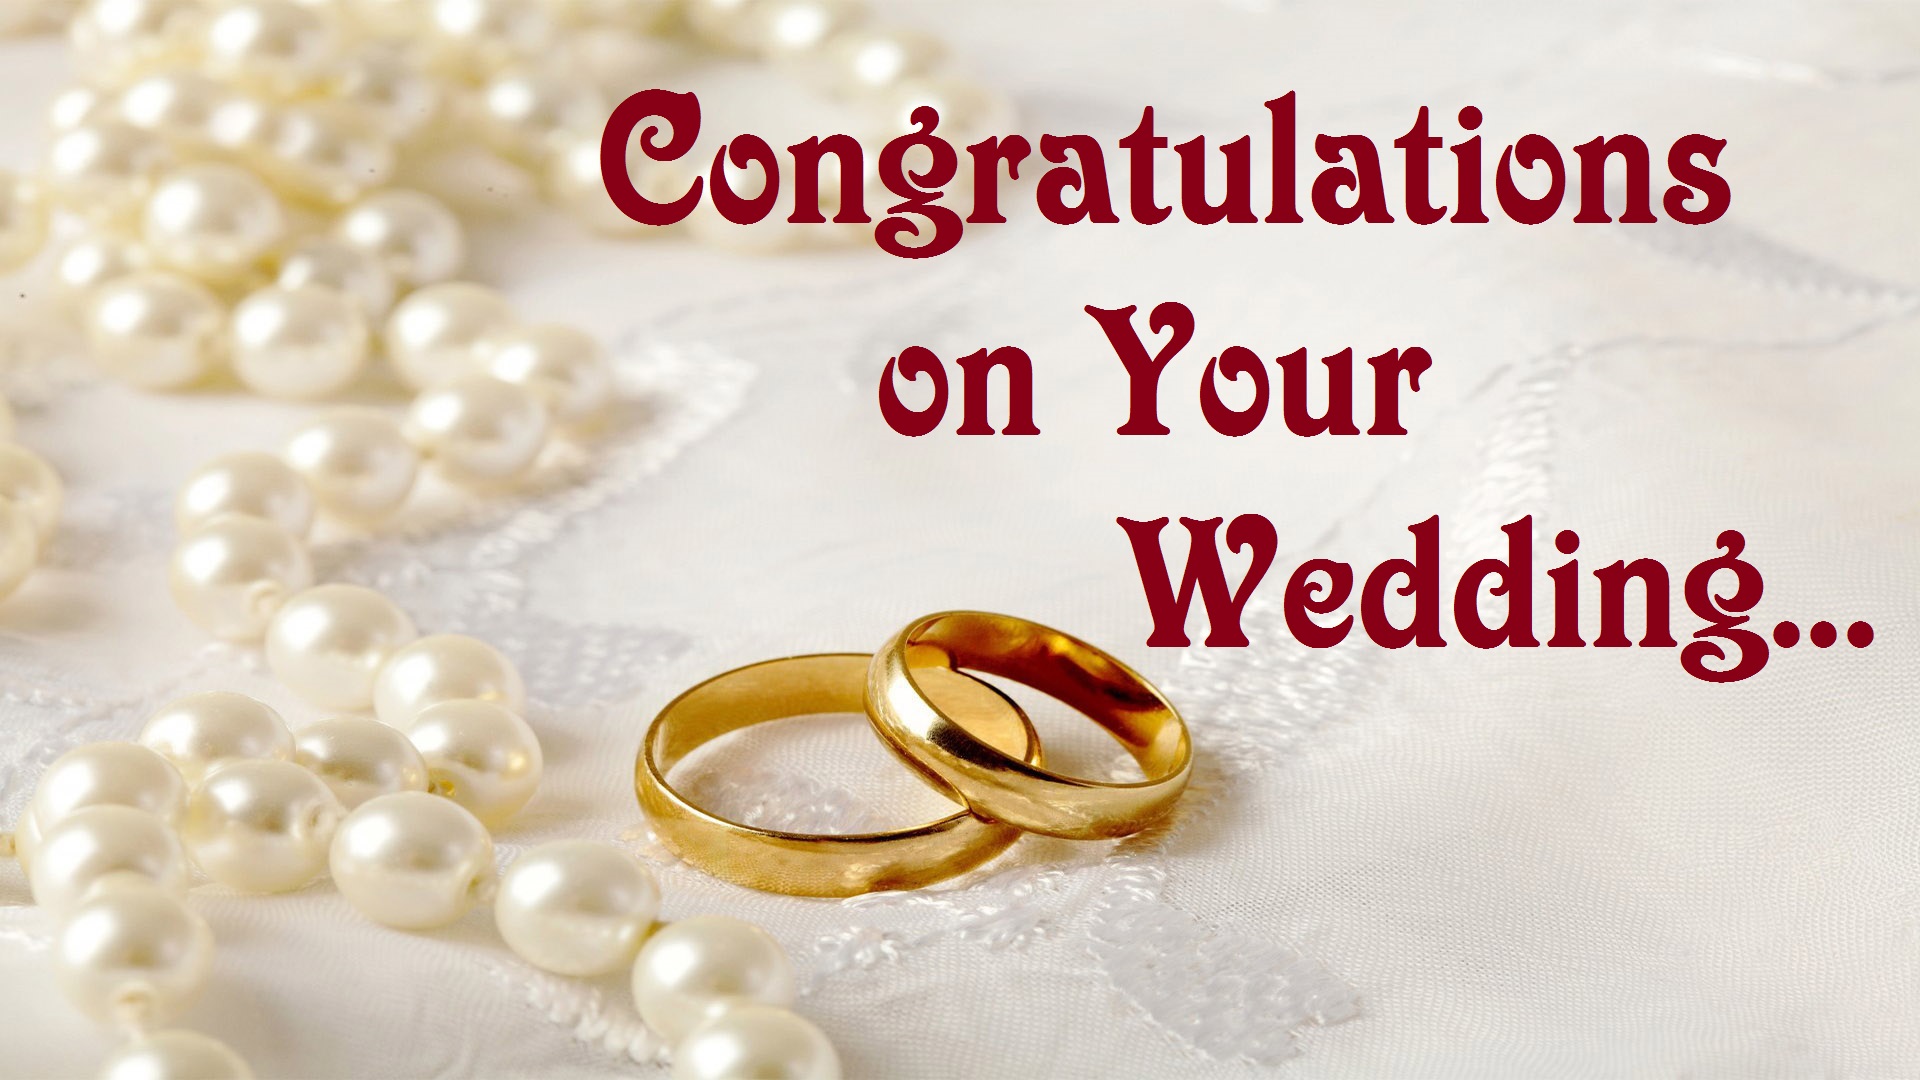 wedding-congratulations-images-hd-pictures-wedding-greeting-cards